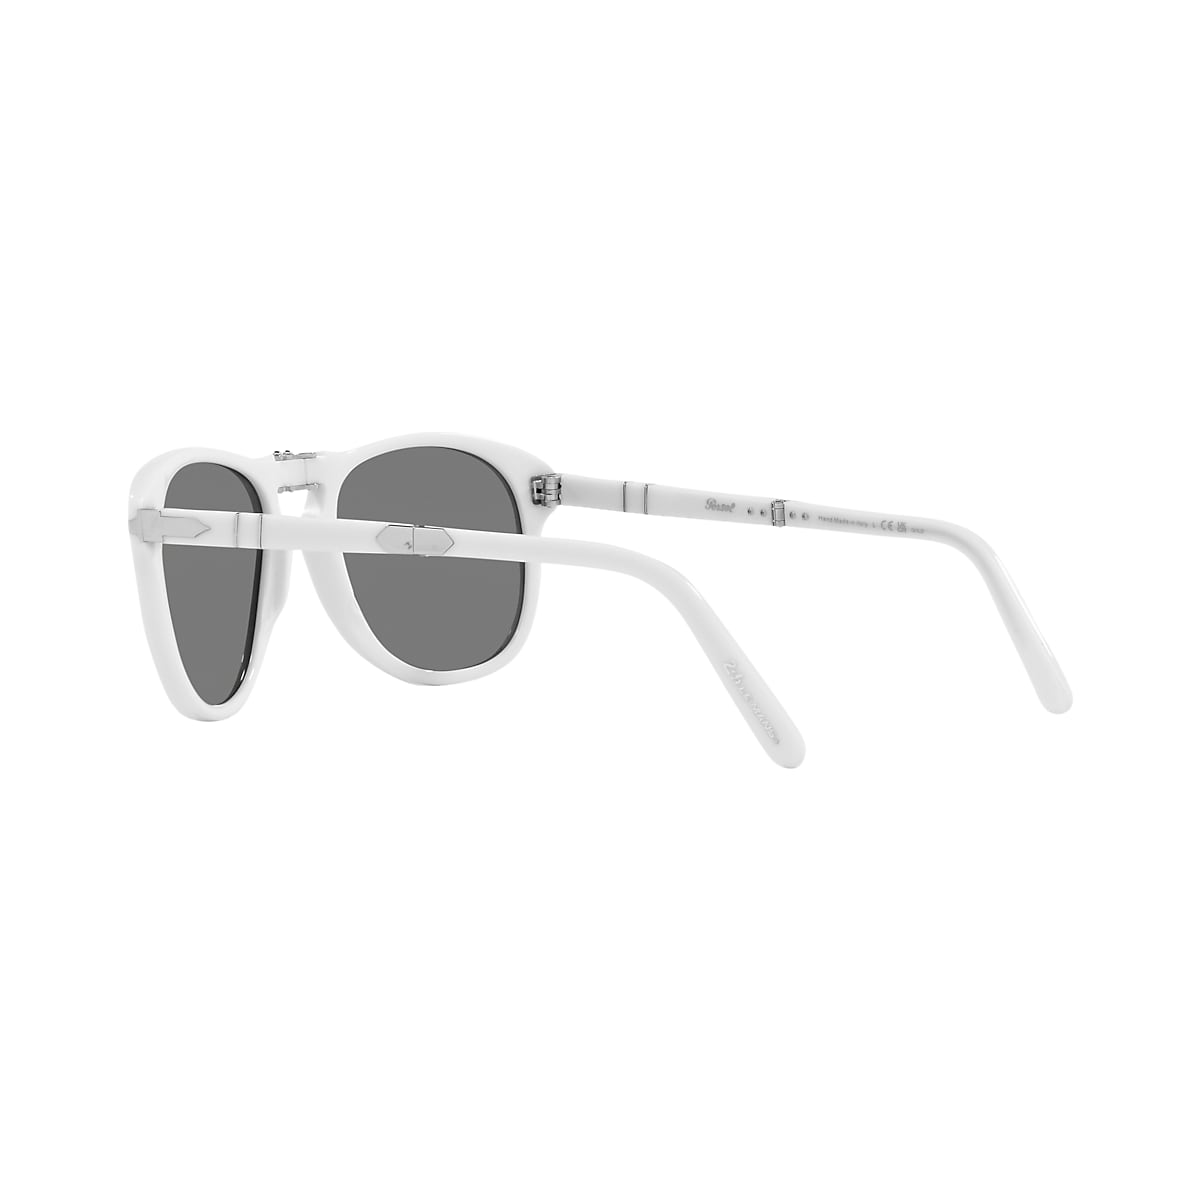 Persol 714SM - Steve McQueen Exclusive Sunglasses in Opal Ivory